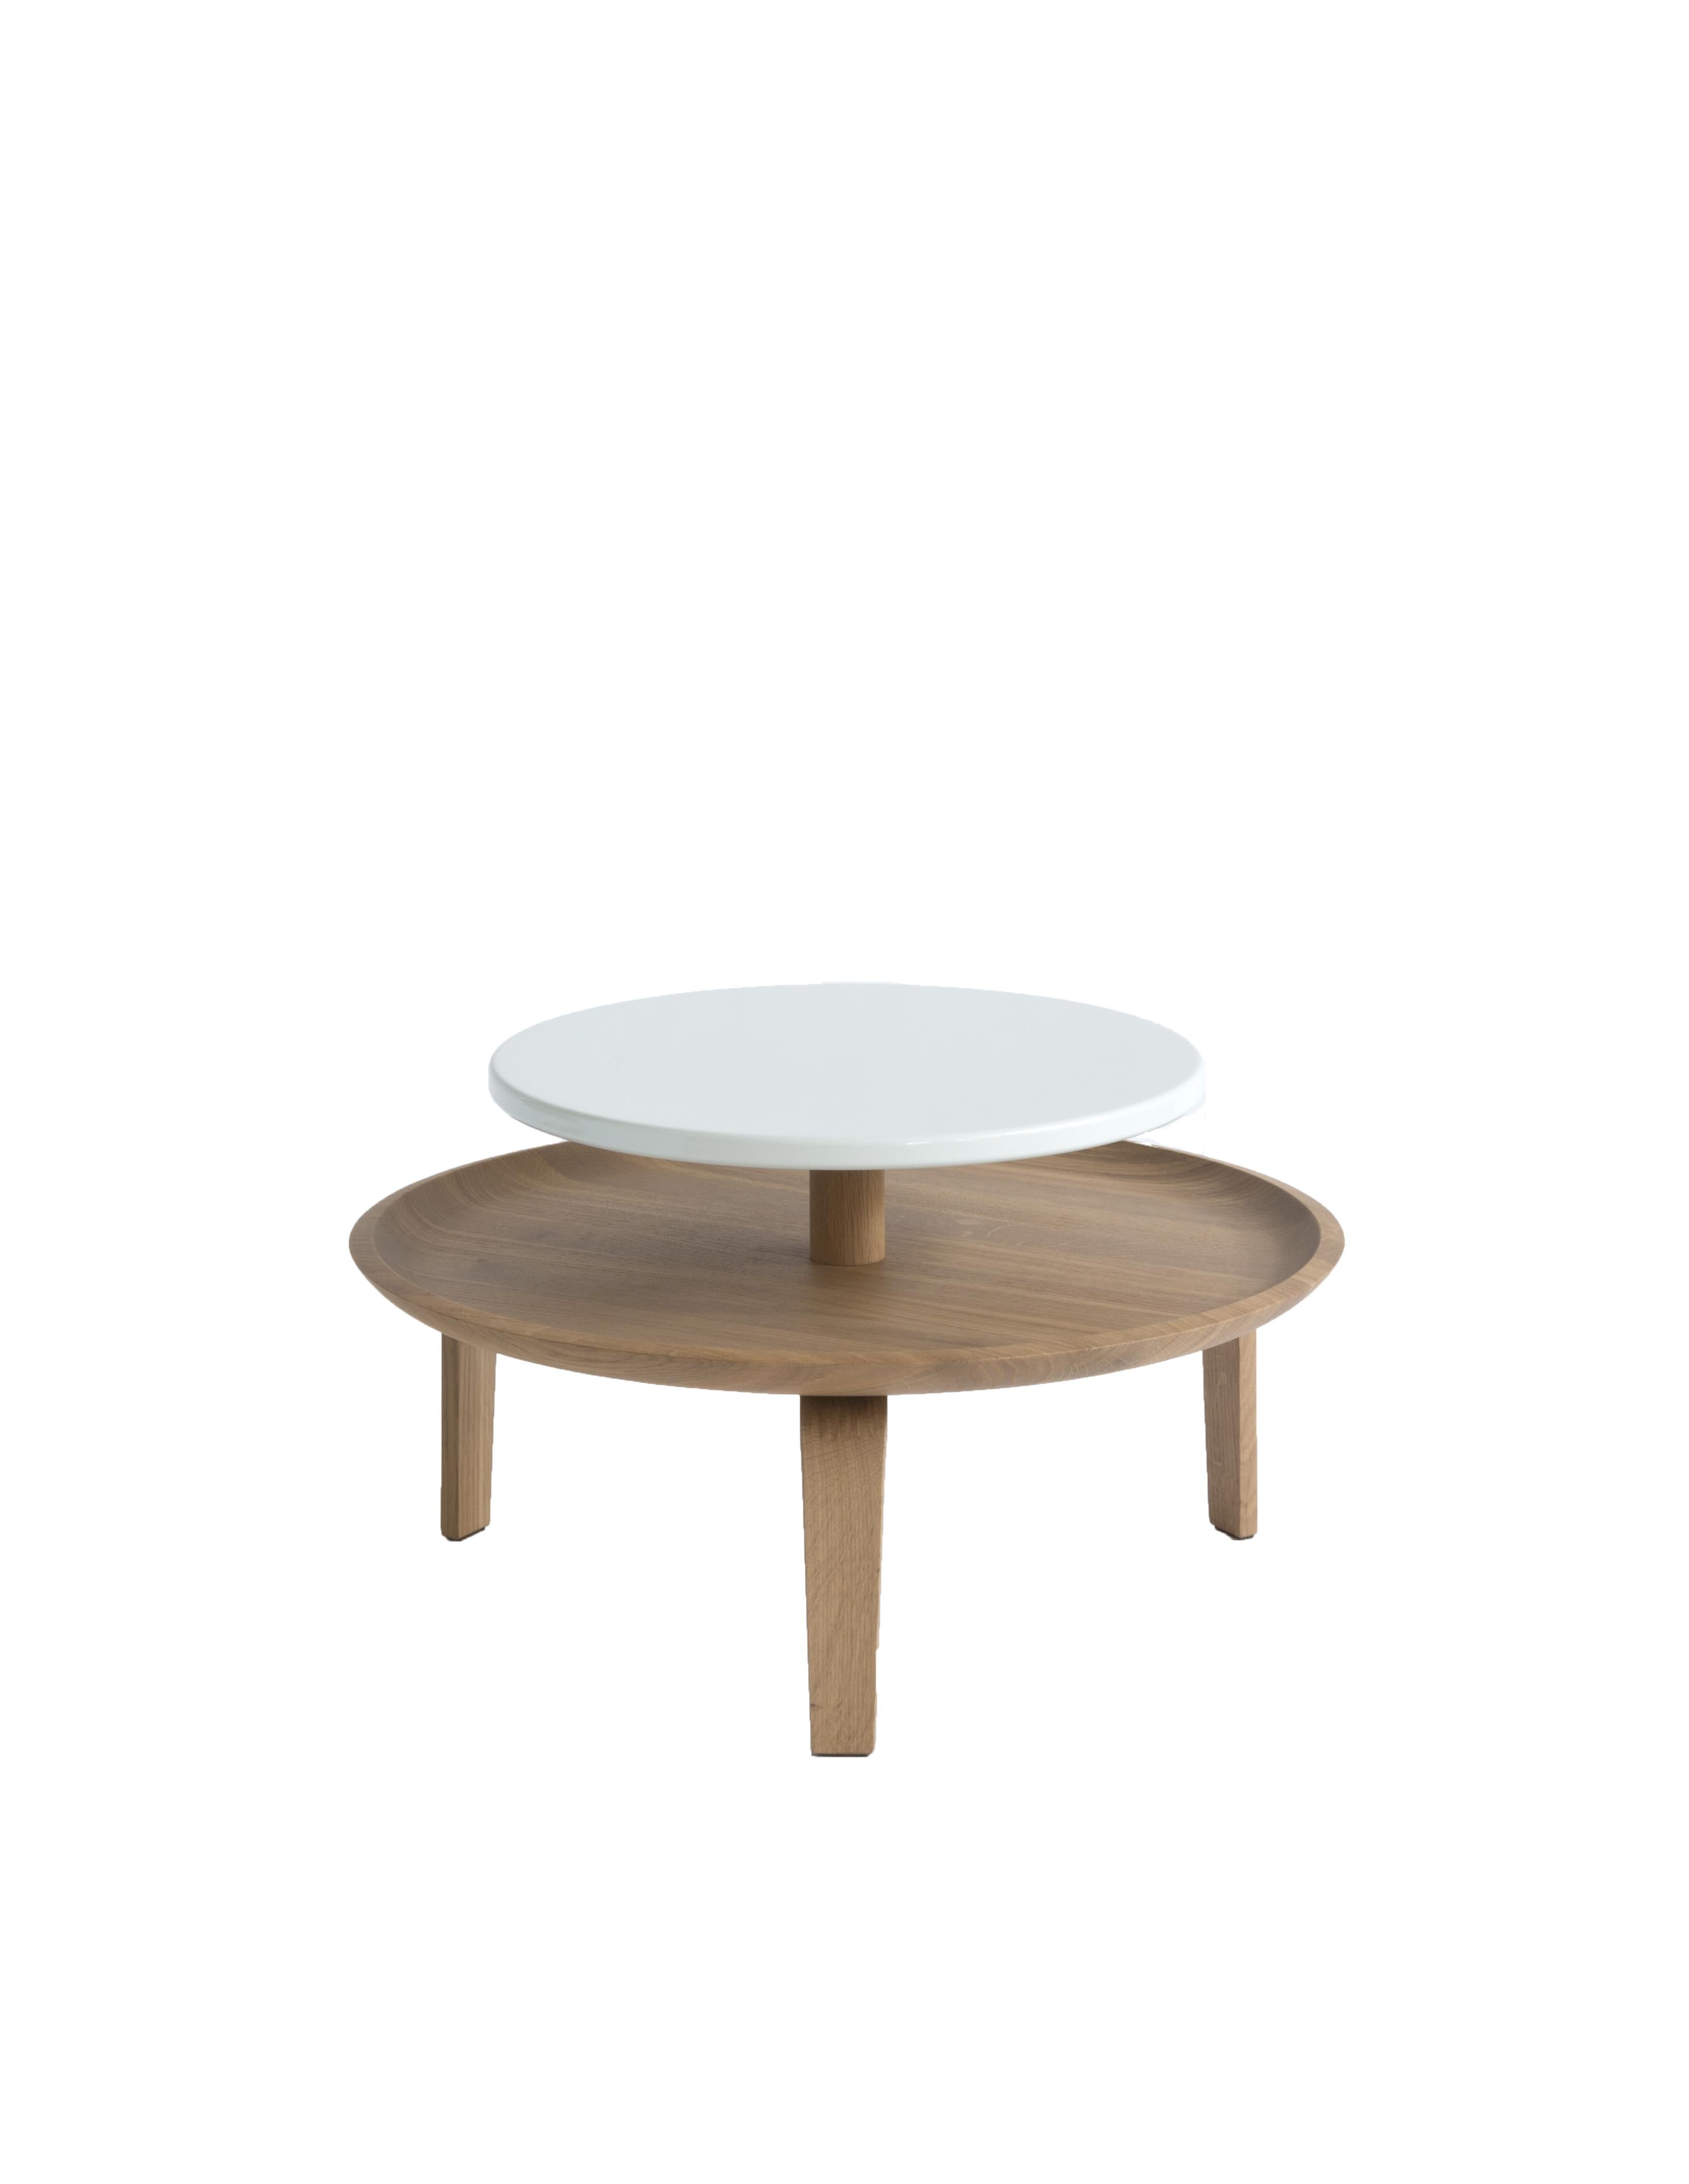 Set of 2, Secreto 60 Coffee Table , White, “Nuit de Noel” by Colé Italia
Dimensions: H.32; base plate ø 60 top ø 45 cm.
Materials: Coach table with 2 rounded plates; 3 legs and base plate in natural solid oak;
top matt lacquered in 5